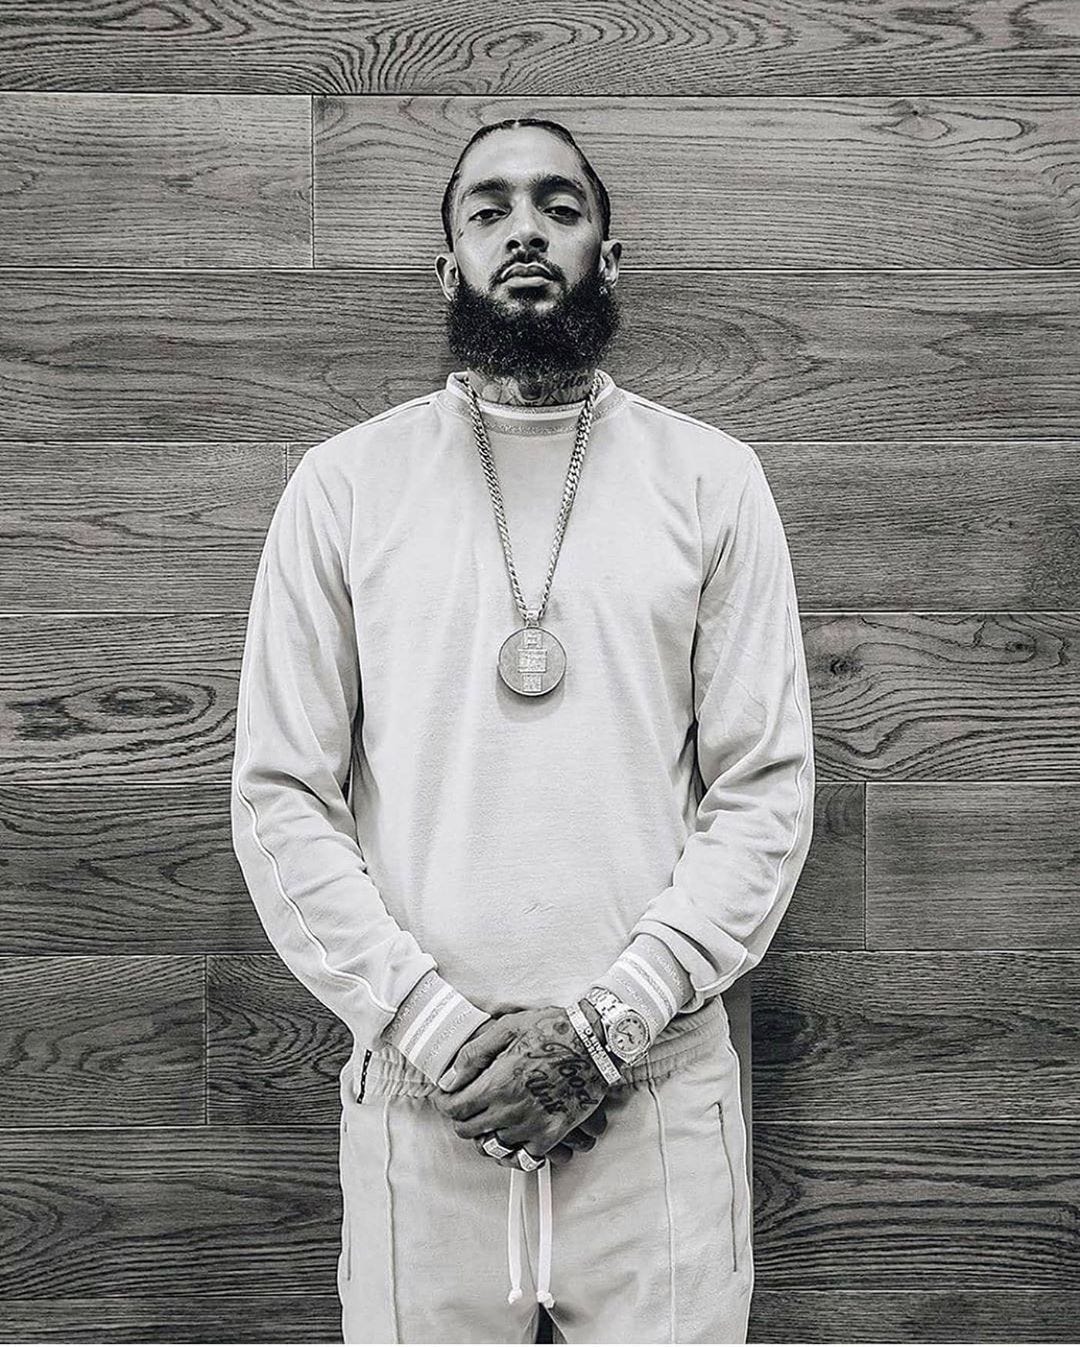 Nipsey Hussle's 10 Steps To Building A Music Empire